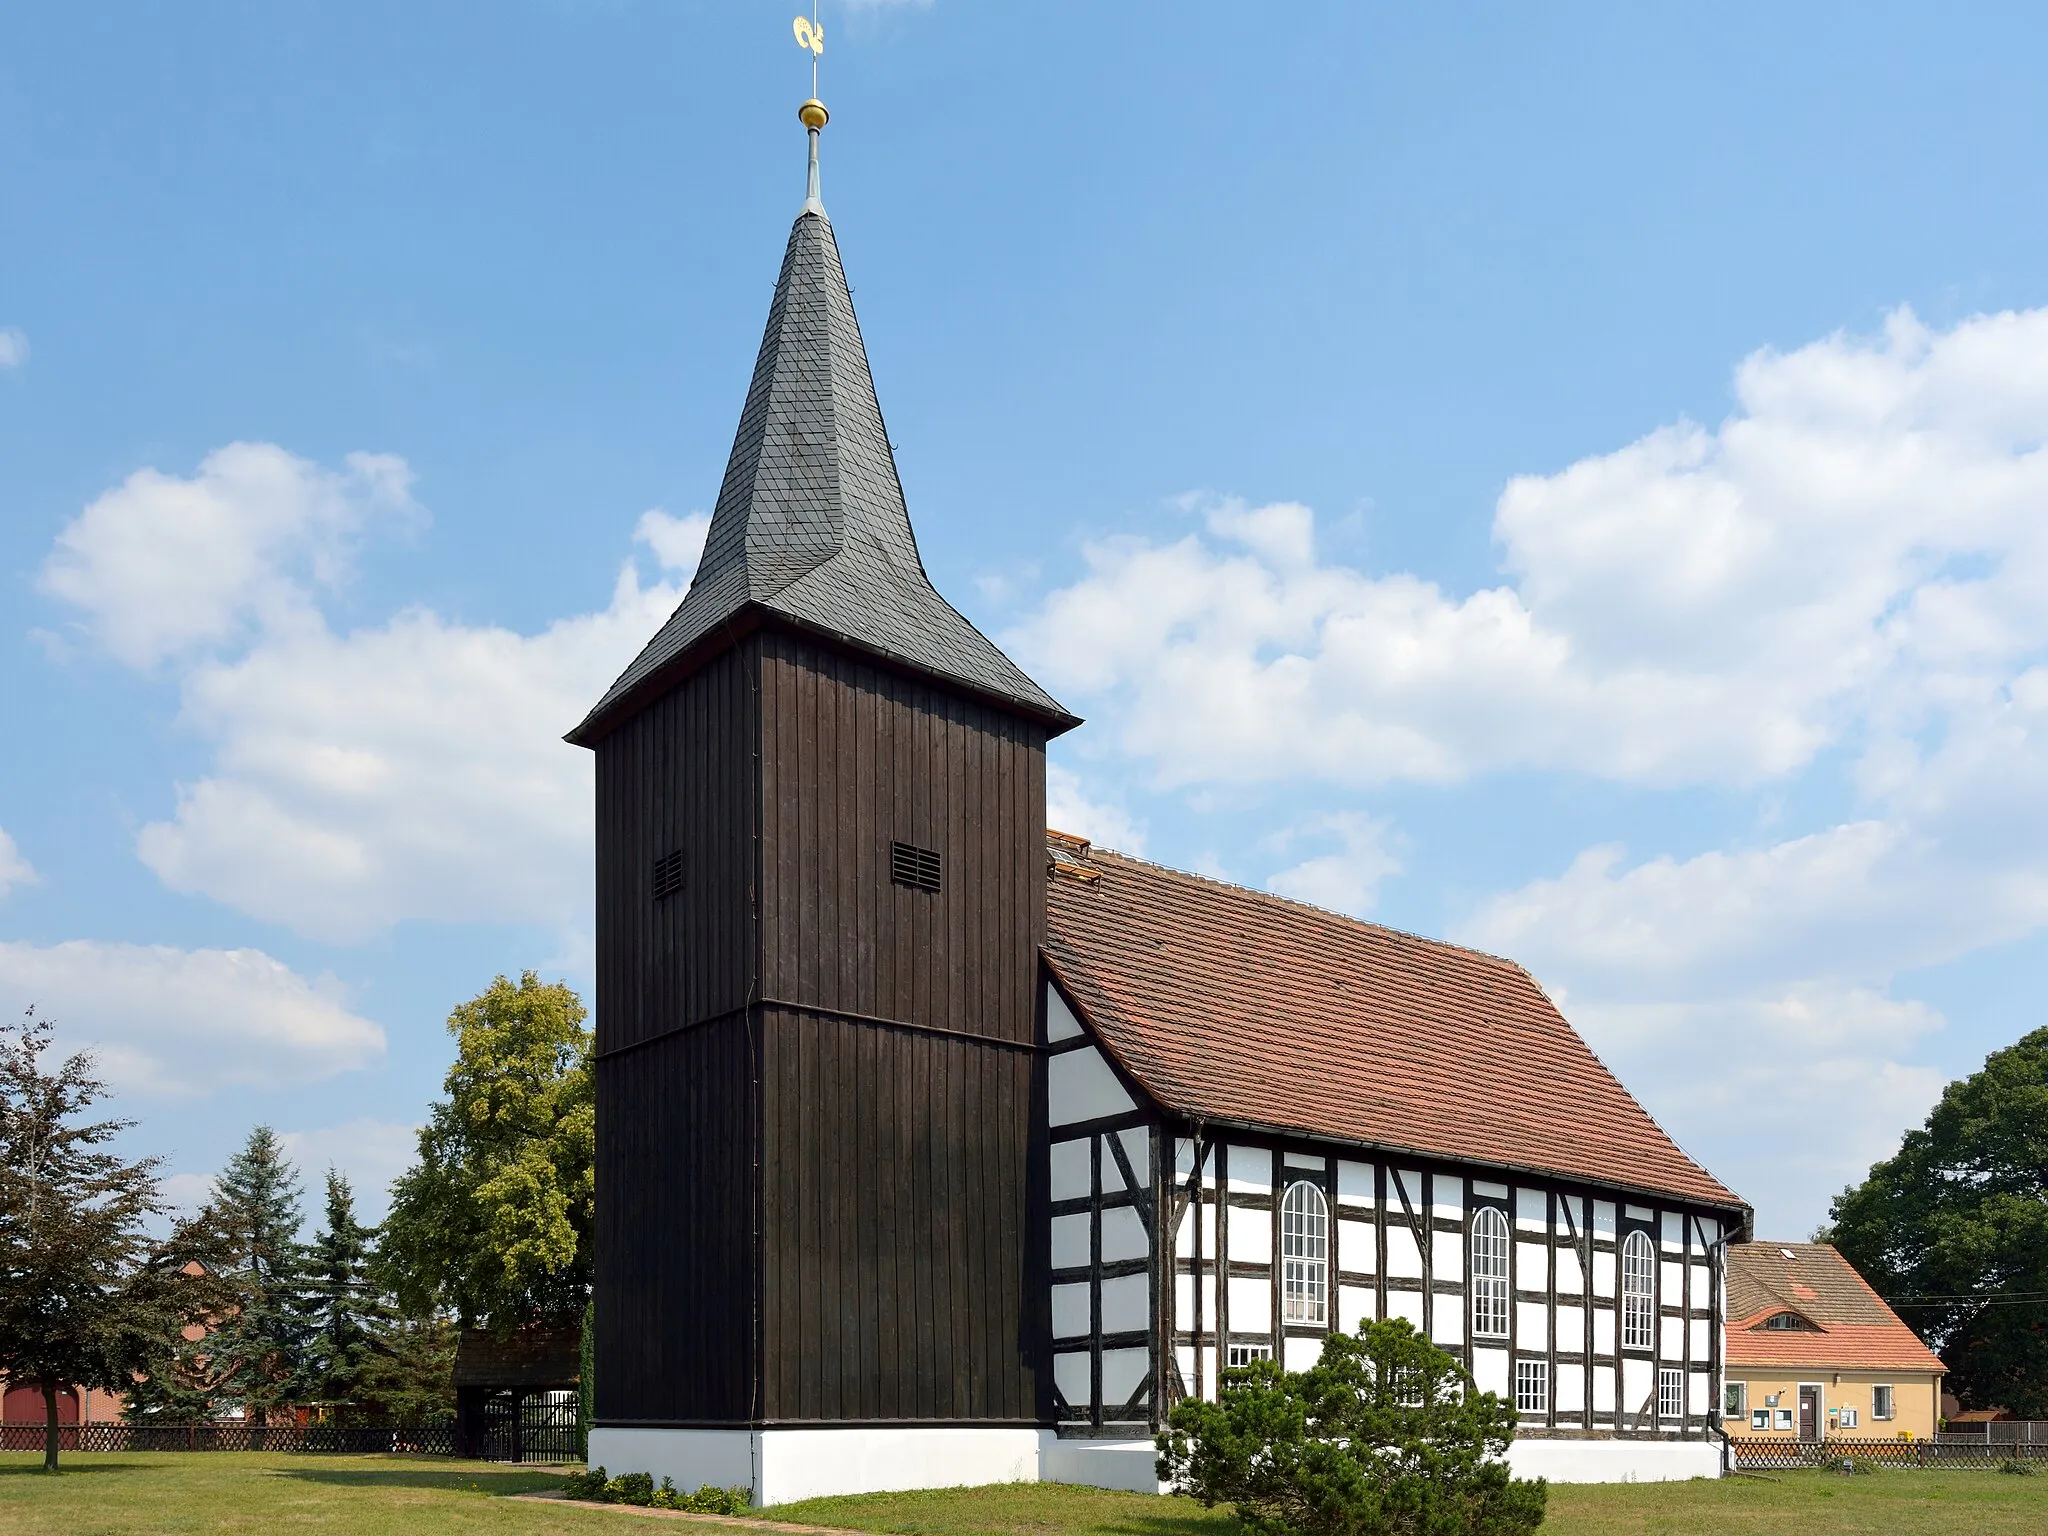 Photo showing: Die Kirche in Bluno im August 2015

TransLausitz 2015 um Boxberg/O.L.
This photo was taken during the project transLAUSITZ in August 2015.
More mediafiles of that project are provided within the category transLAUSITZ 2015.

The production, editing or release of this file was supported by the Community-Budget of Wikimedia Deutschland.
To see other files made with the support of Wikimedia Deutschland, please see the category Supported by Wikimedia Deutschland.
العربية ∙ বাংলা ∙ Deutsch ∙ English ∙ Esperanto ∙ français ∙ magyar ∙ Bahasa Indonesia ∙ italiano ∙ 日本語 ∙ македонски ∙ മലയാളം ∙ Bahasa Melayu ∙ Nederlands ∙ português ∙ русский ∙ svenska ∙ українська ∙ +/−